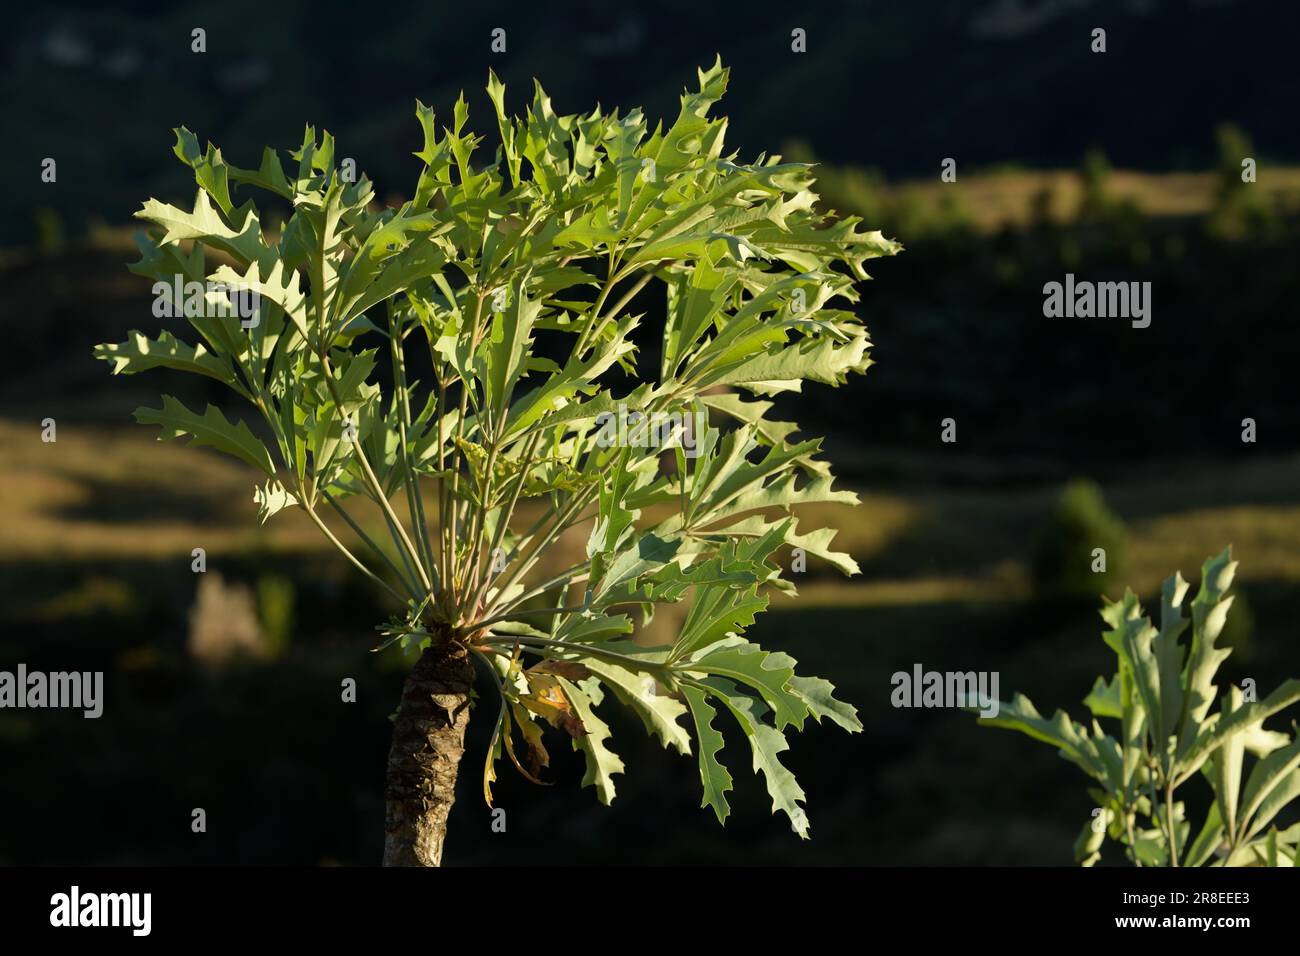 Plants of Africa, Highveld Cabbage tree, Cussonia paniculata, high altitude plant of Drakensberg, KwaZulu-Natal, South Africa, leaf growth tip Stock Photo